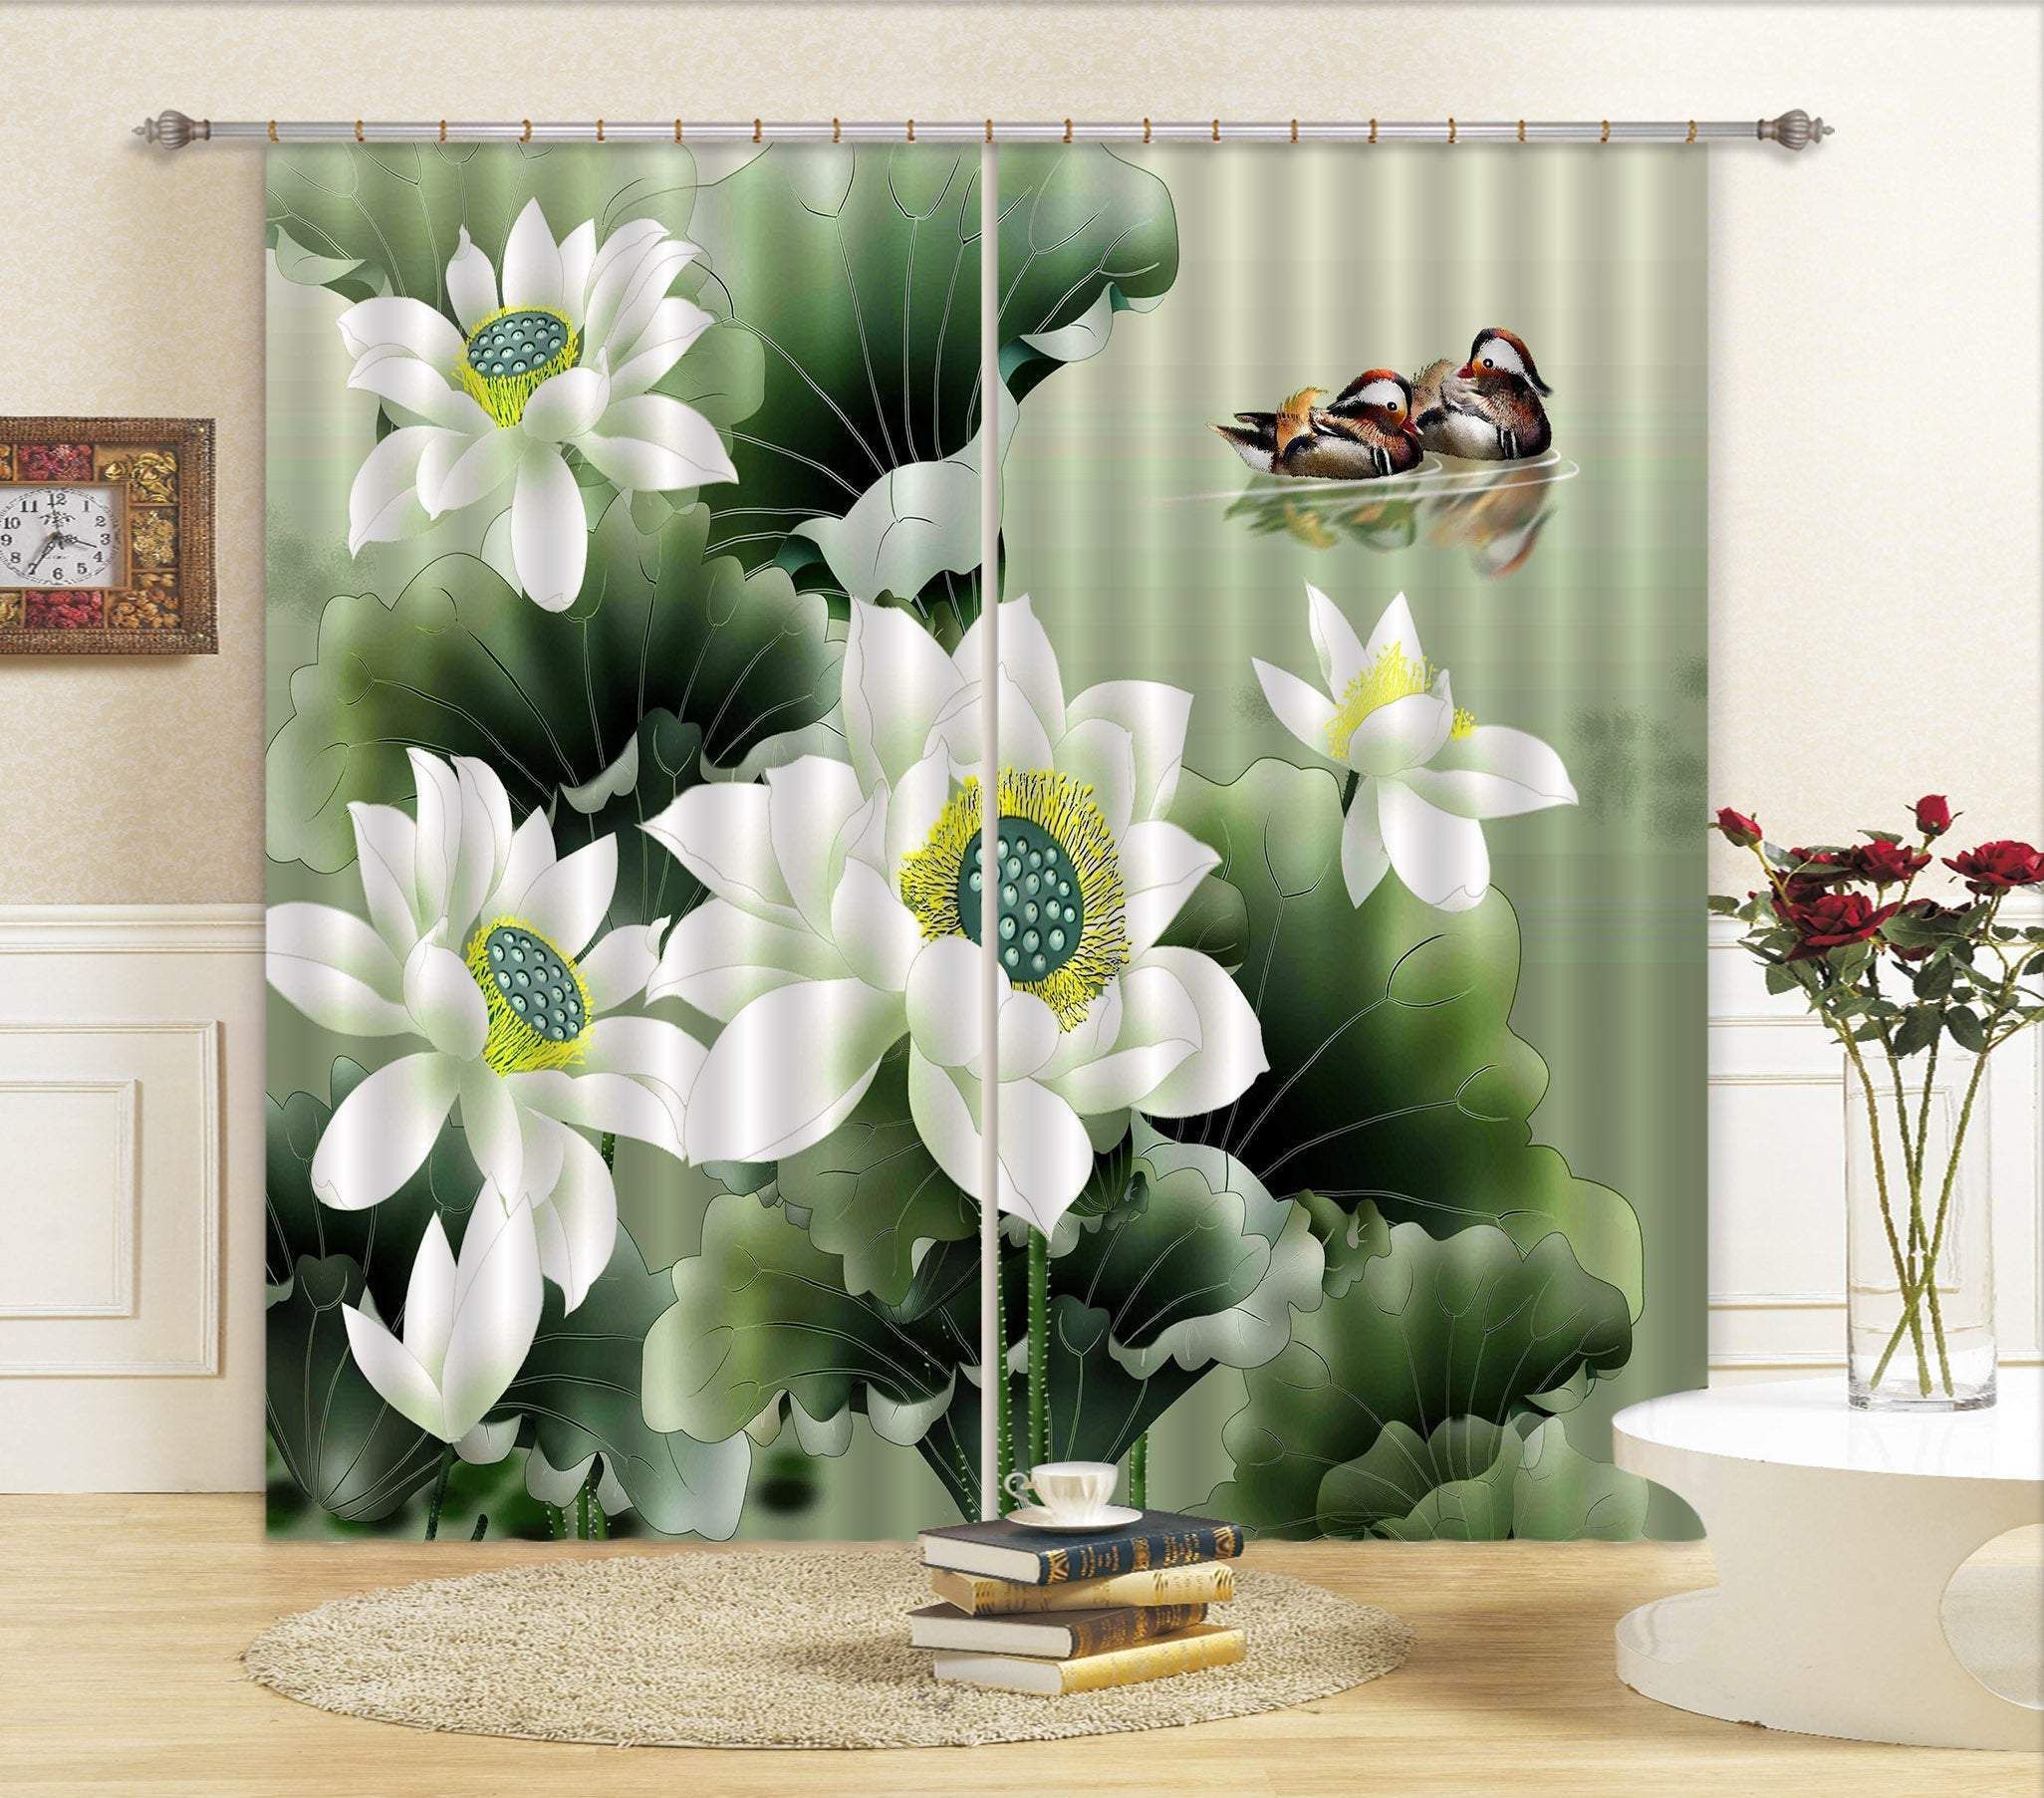 3D Lotus Flowers With Duck Printed Window Curtain